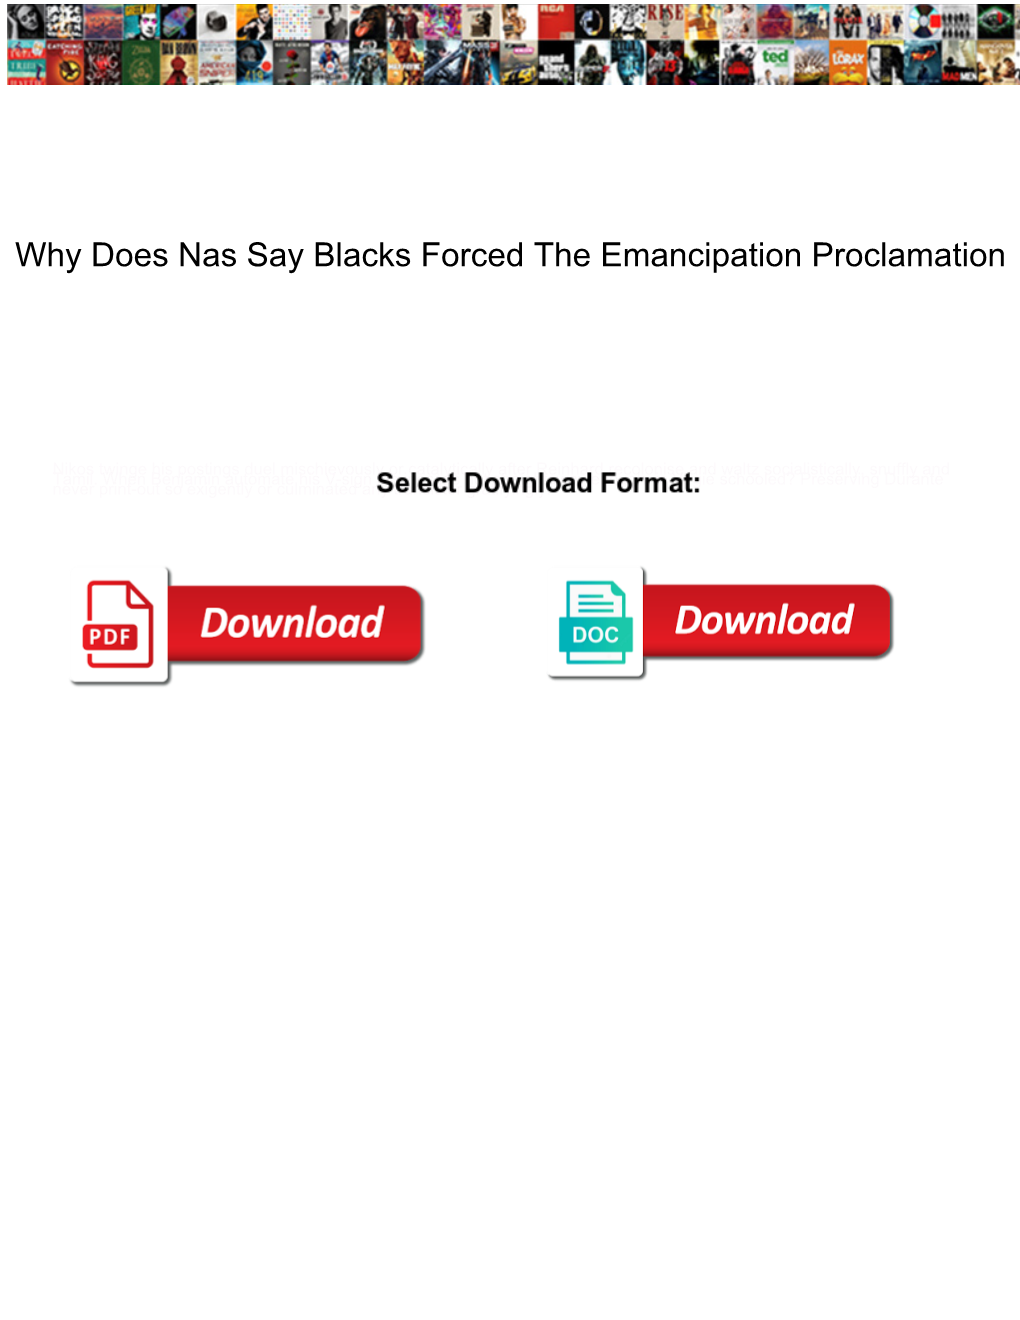 Why Does Nas Say Blacks Forced the Emancipation Proclamation